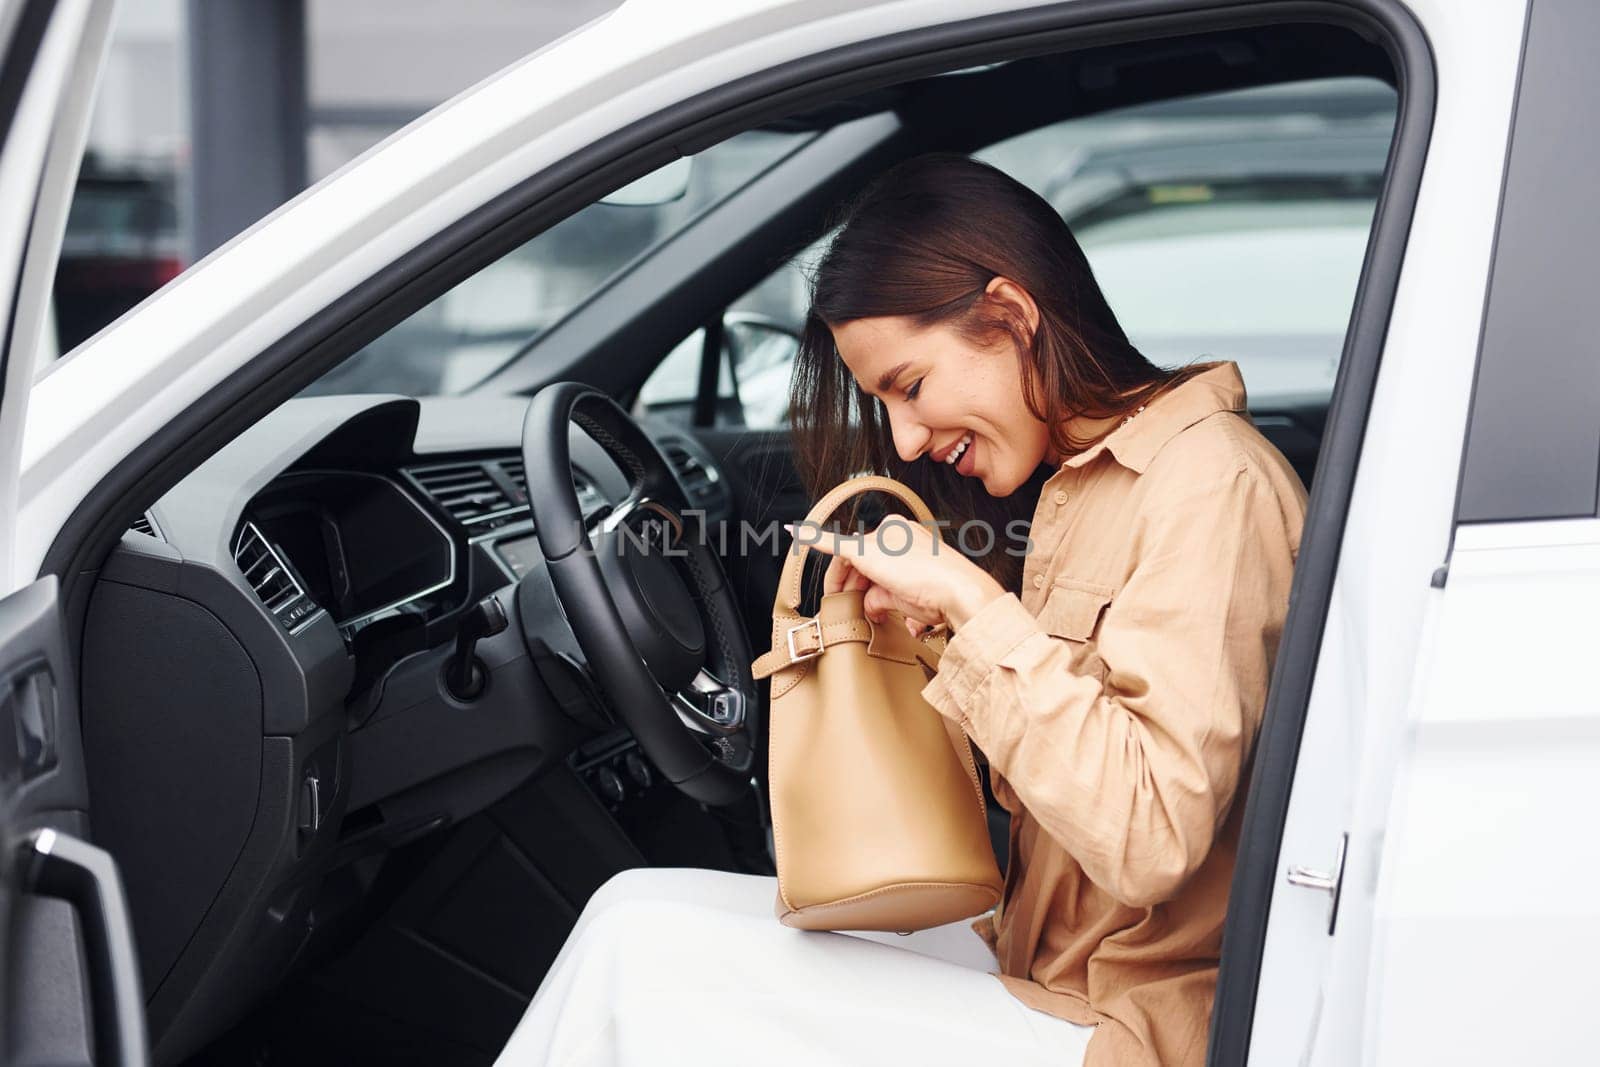 Serching something in bag. Fashionable beautiful young woman and her modern automobile.